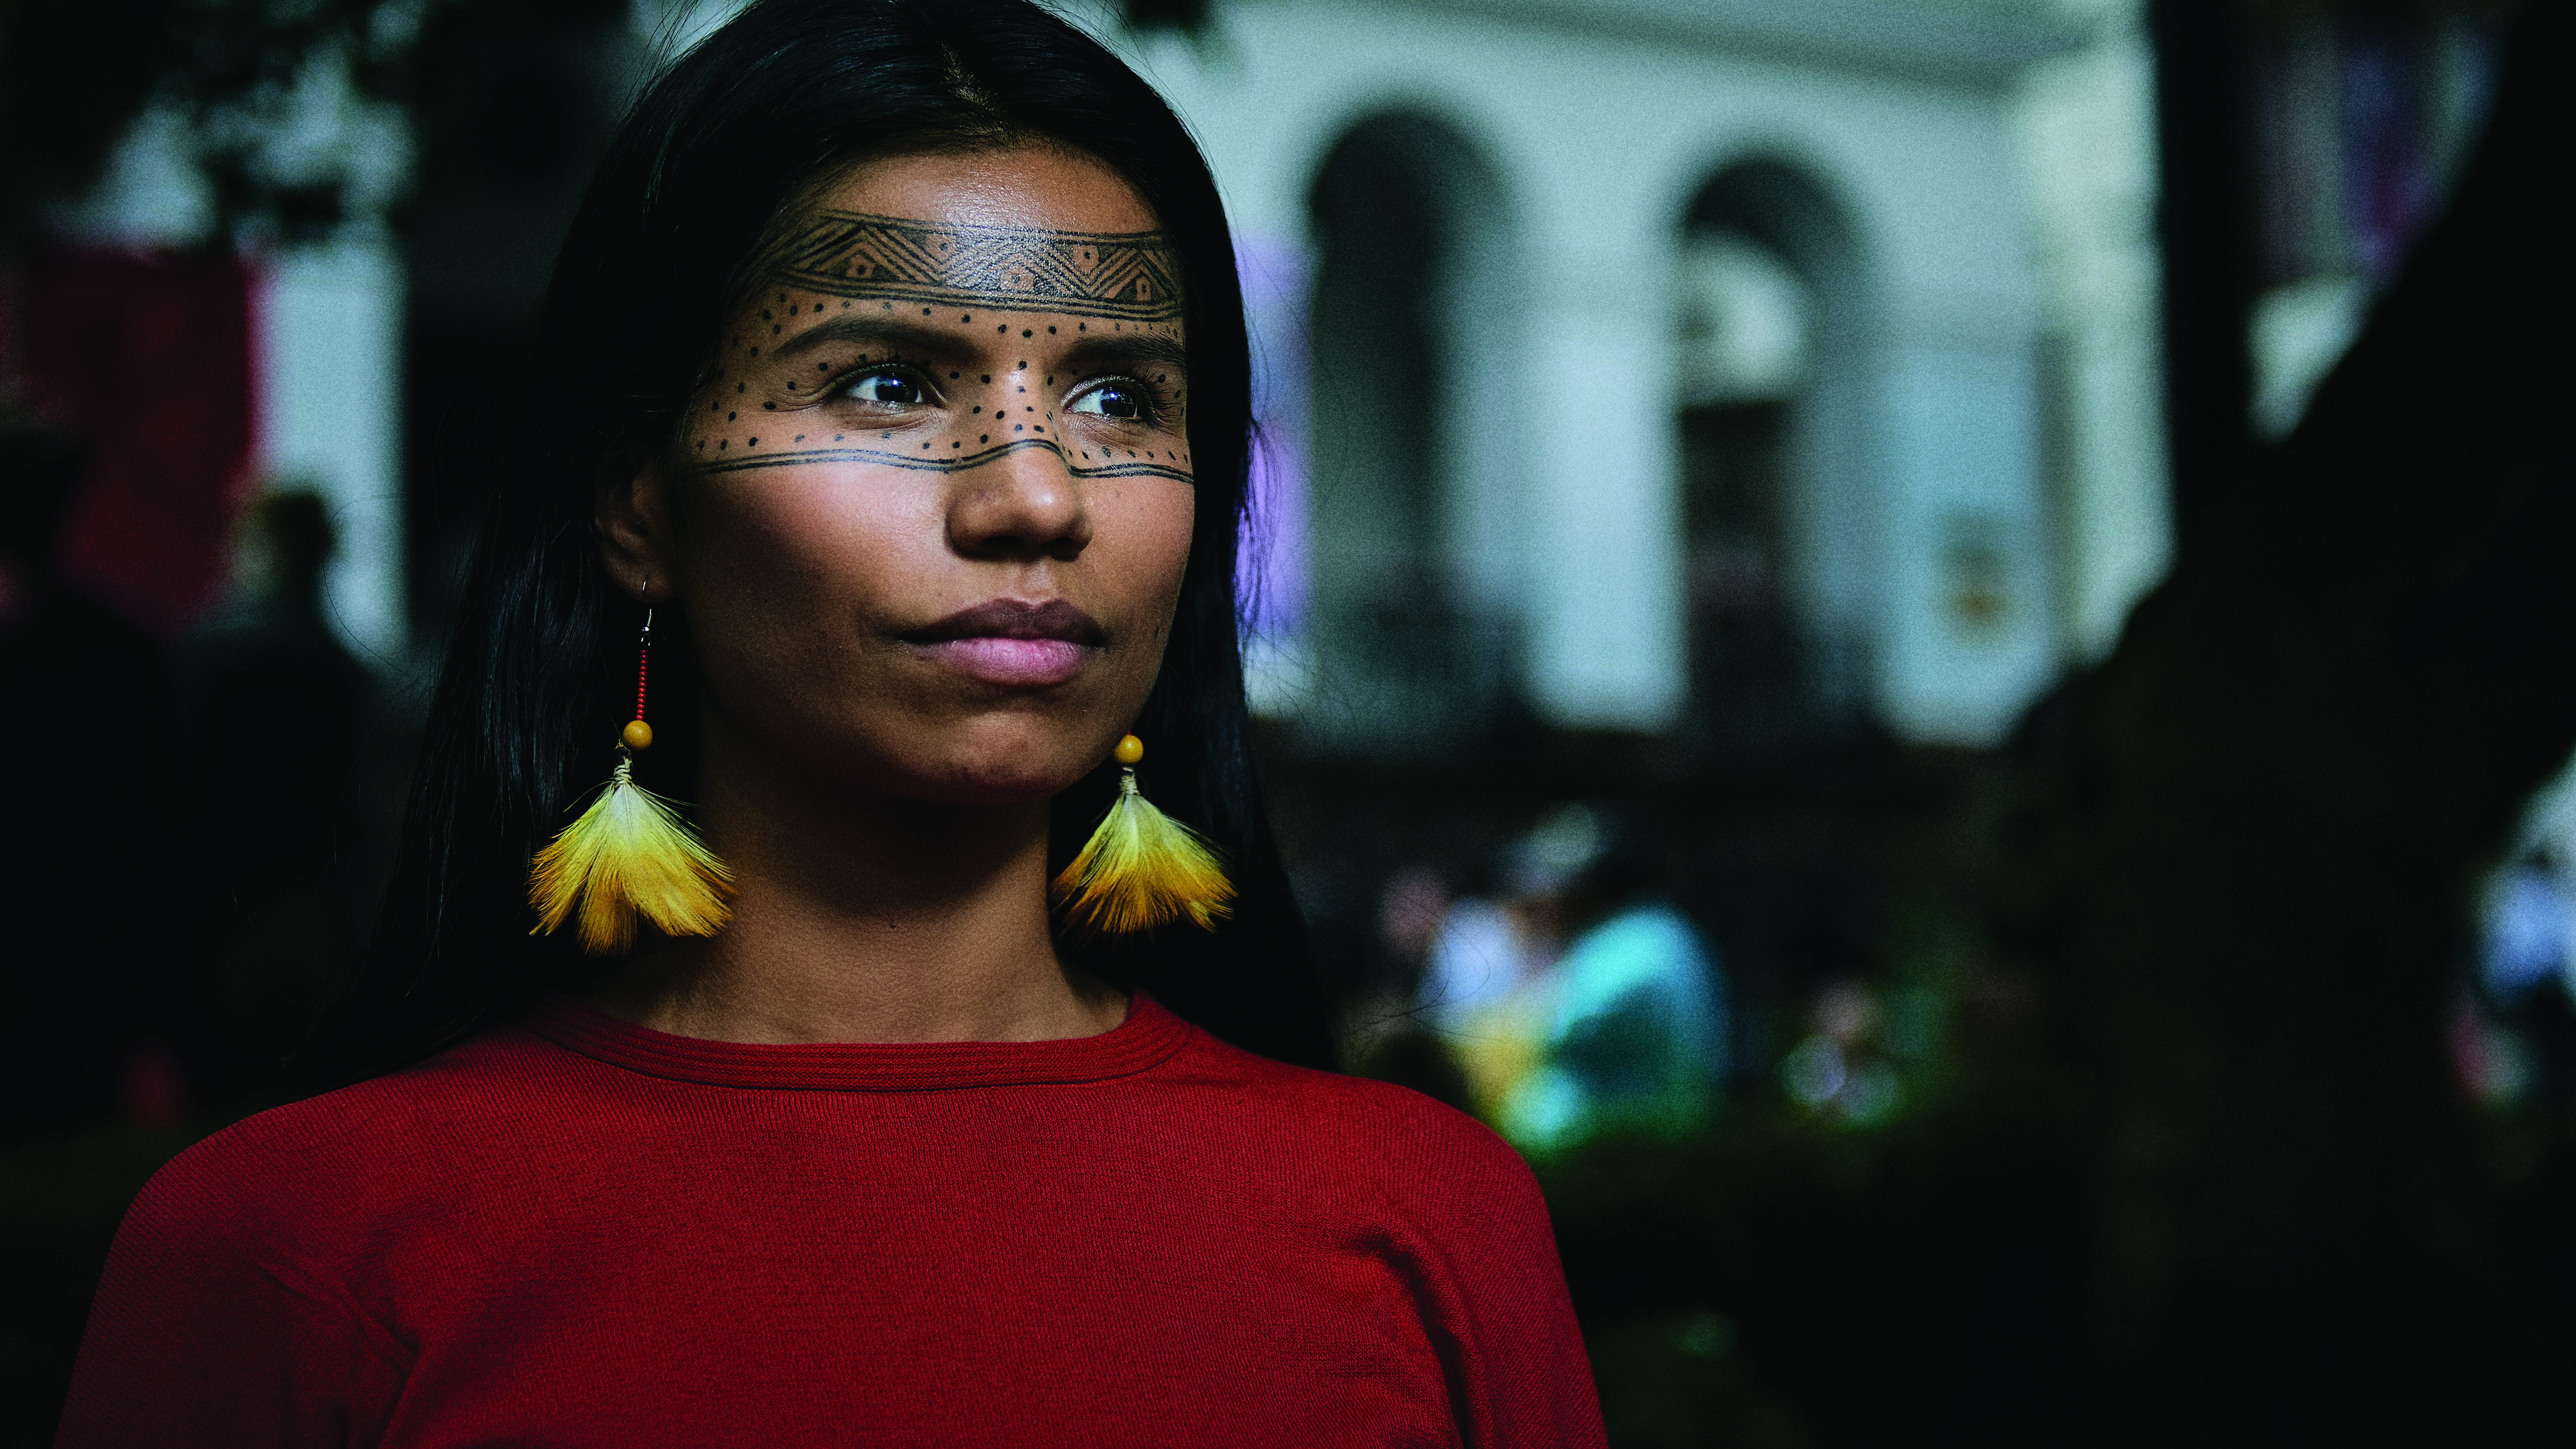 A close-up image of Nina Gualinga. She is an Indigenous woman with painted markings on her face. She wears bead and feather earrings and her shirt is red. 